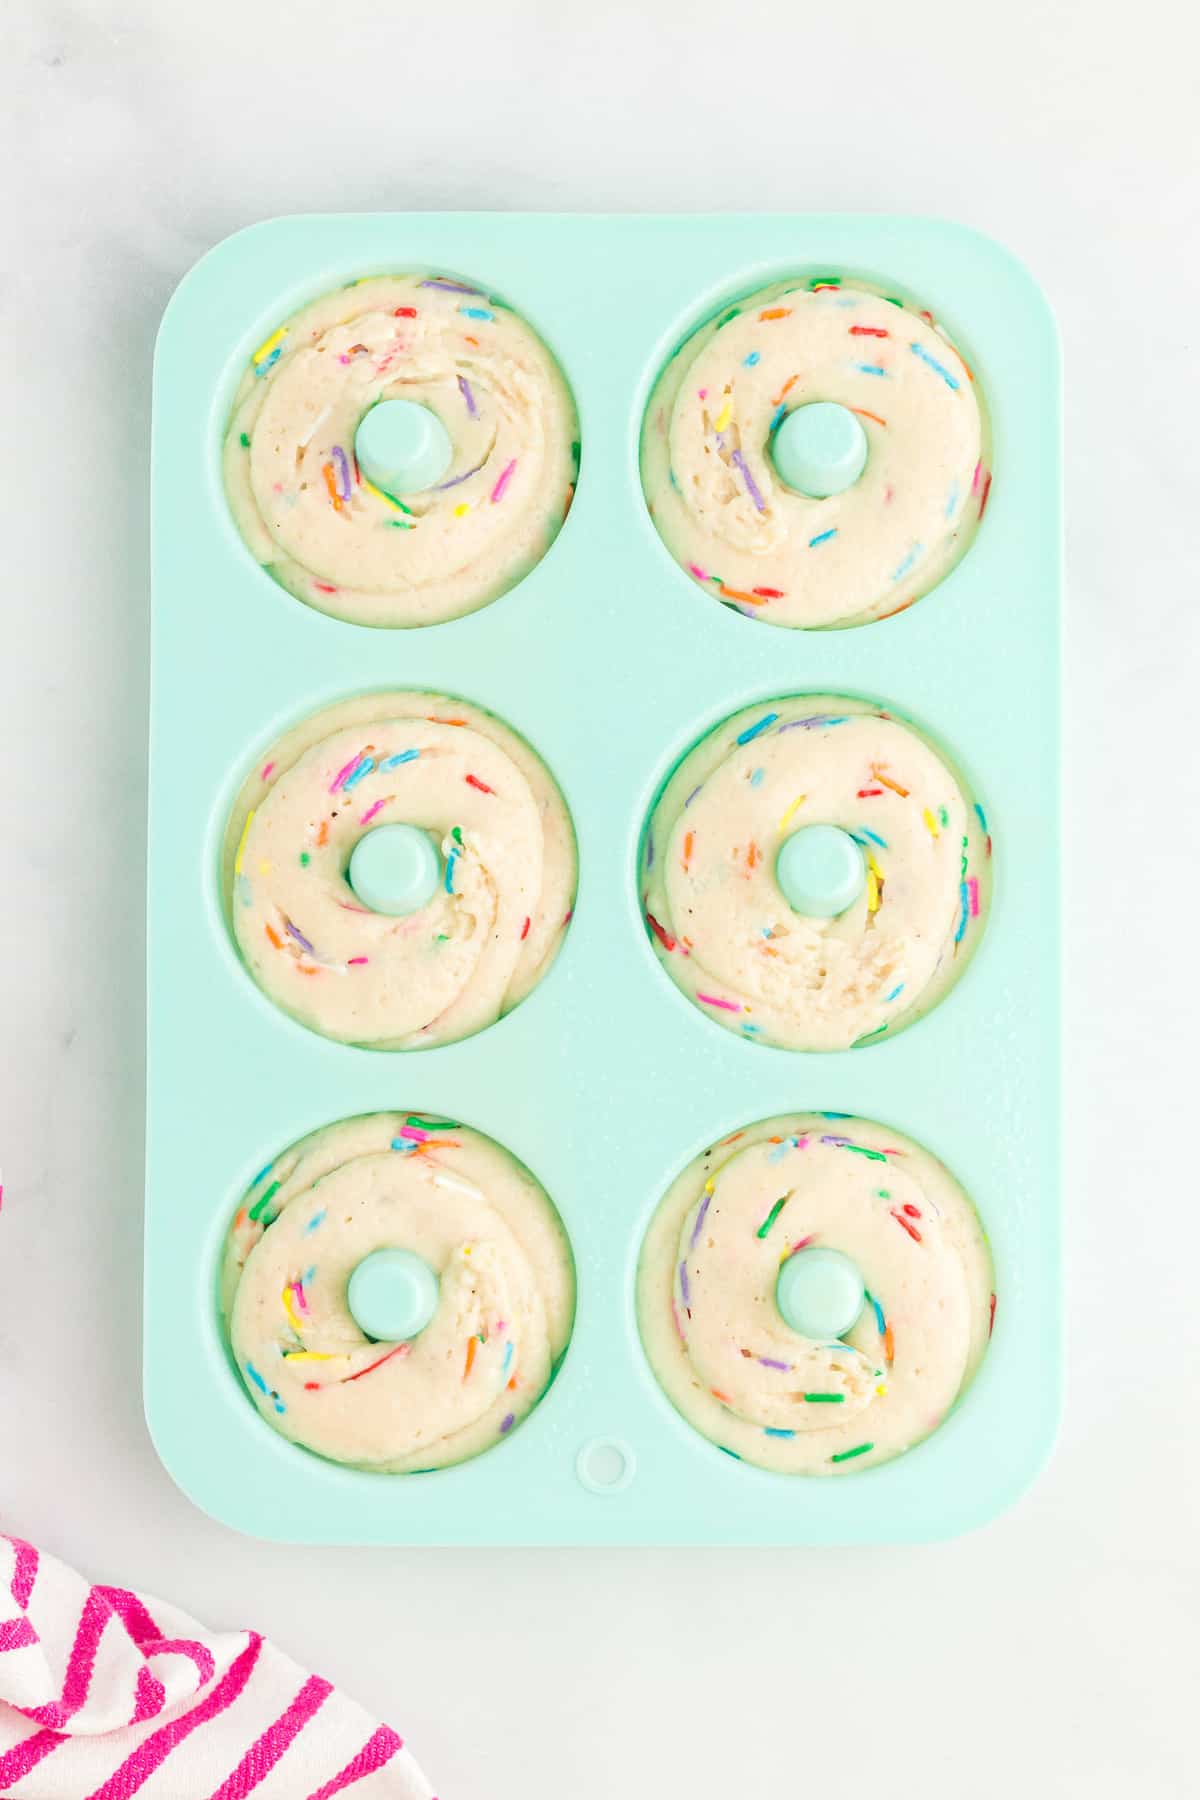 Unbaked donuts in blue silicone pan.